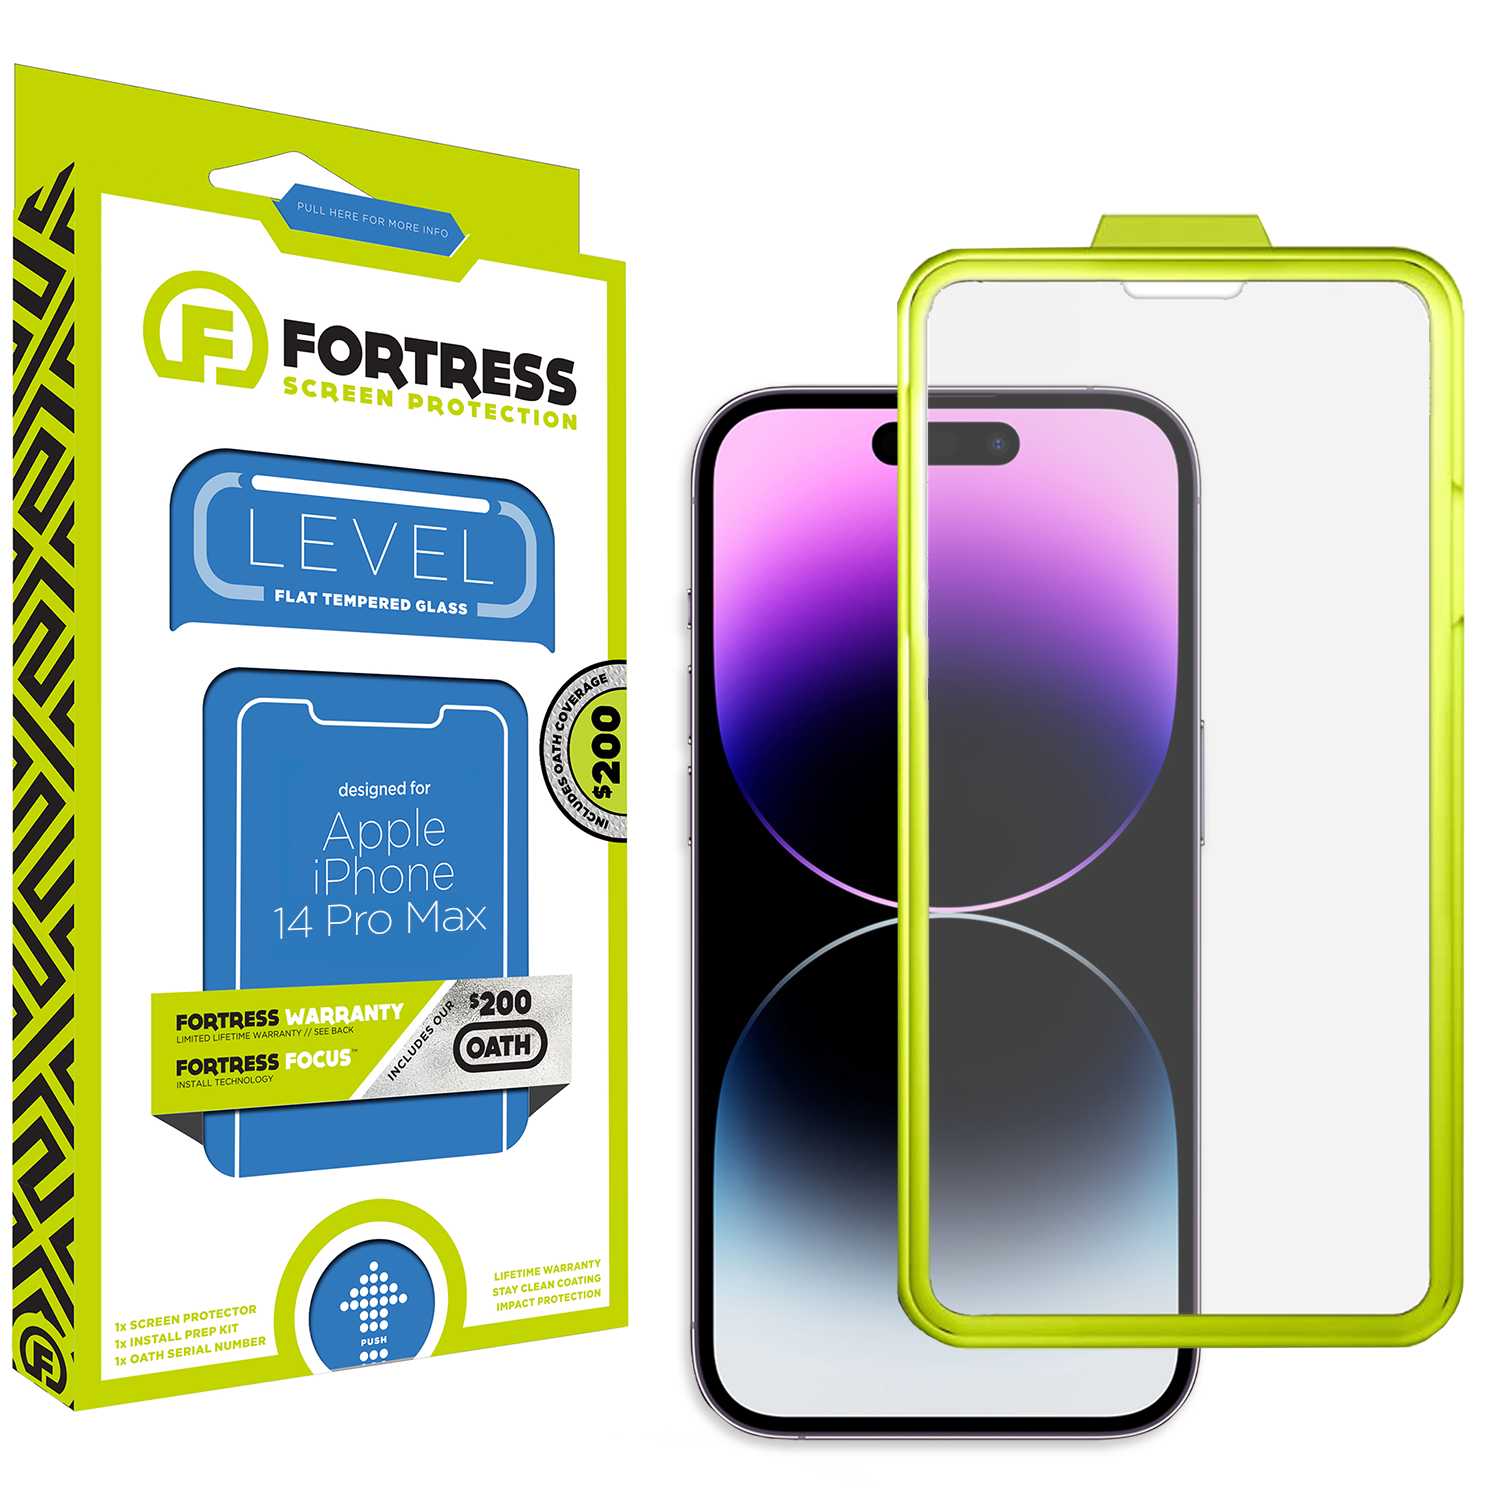 Fortress iPhone 14 Pro Max Screen Protector $200CoverageInstallTool Scooch Screen Protector